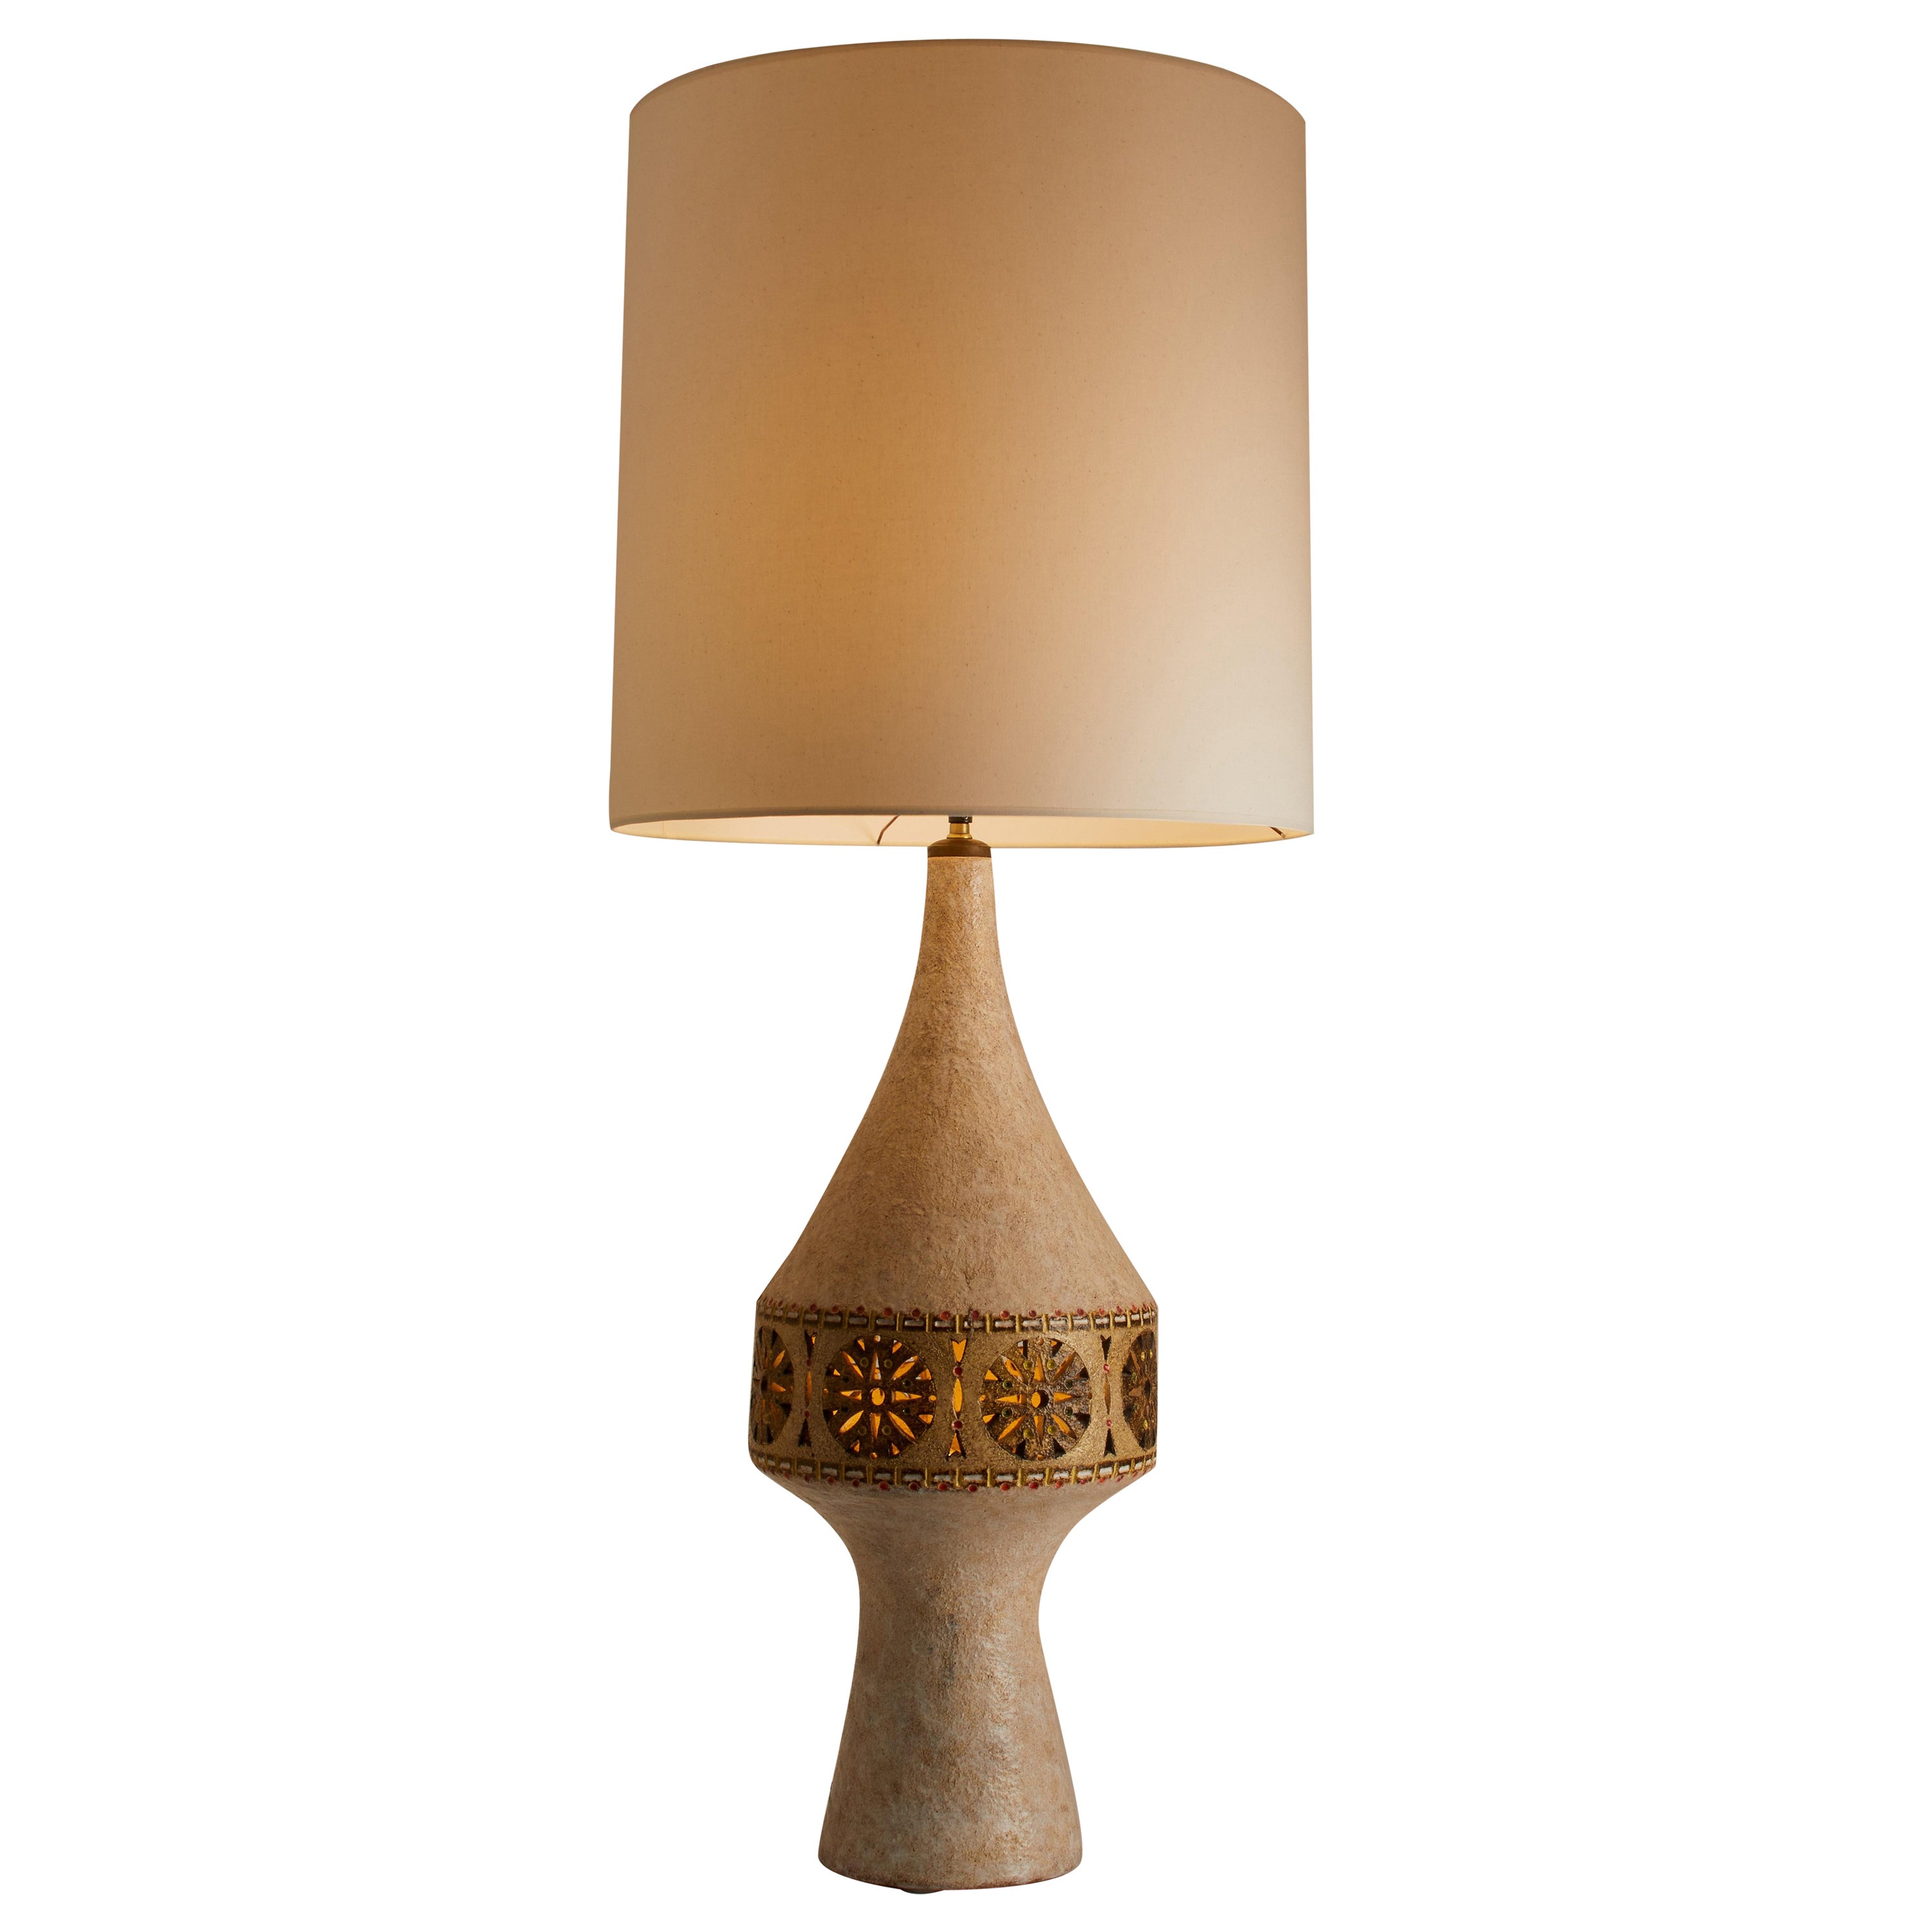 1970s French Huge Scale Raphael Giarusso Ceramic Lamp For Sale